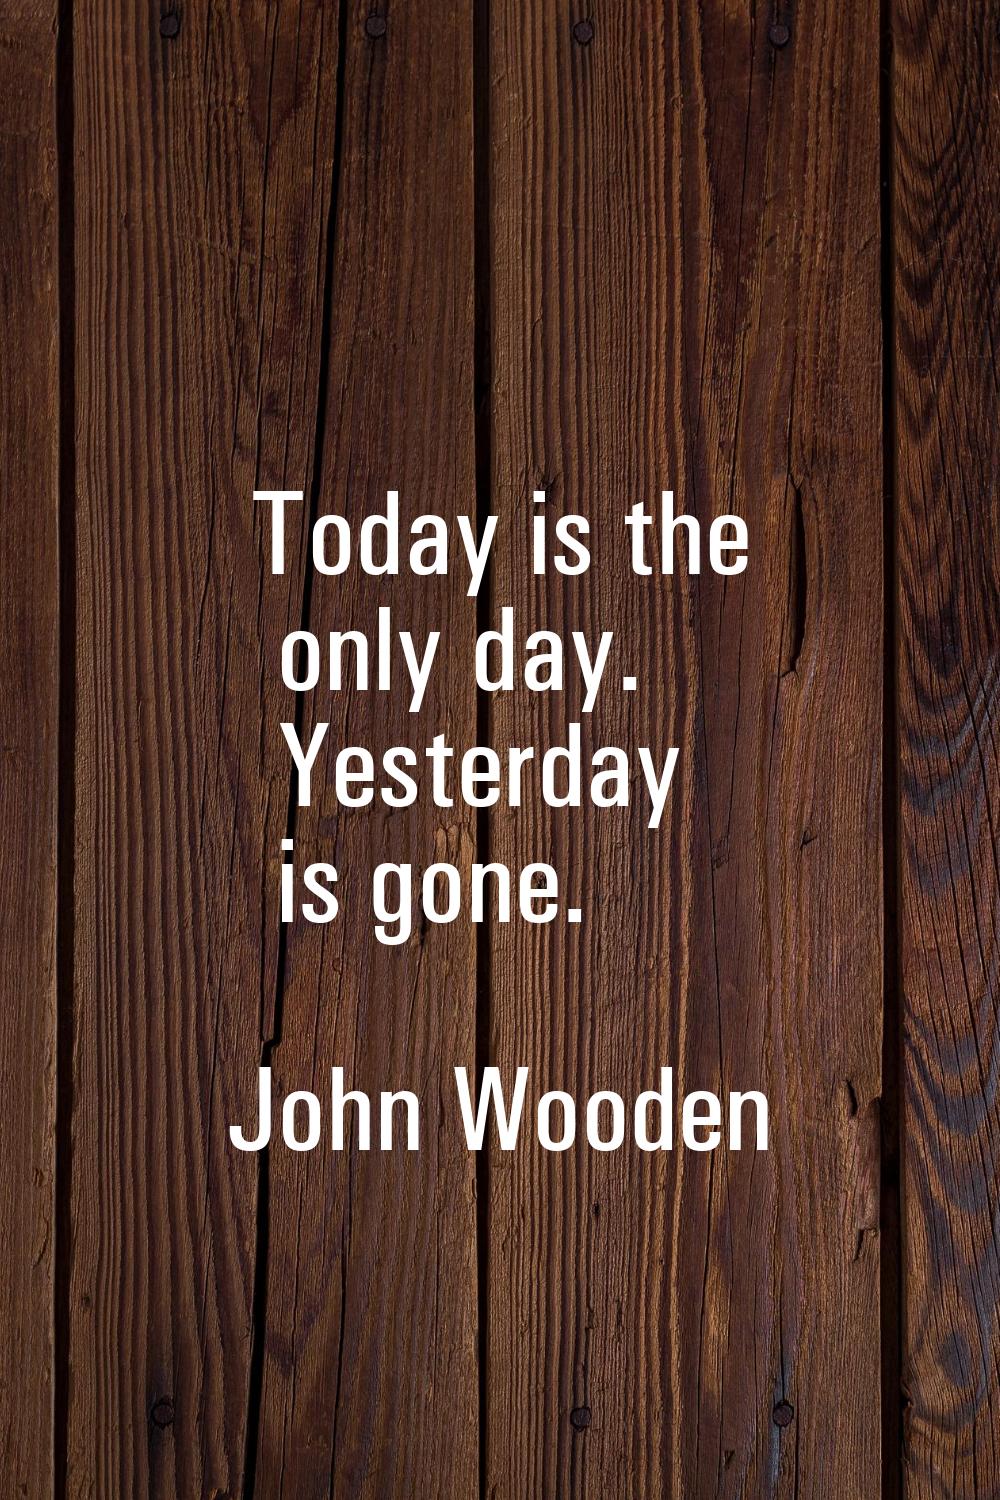 Today is the only day. Yesterday is gone.